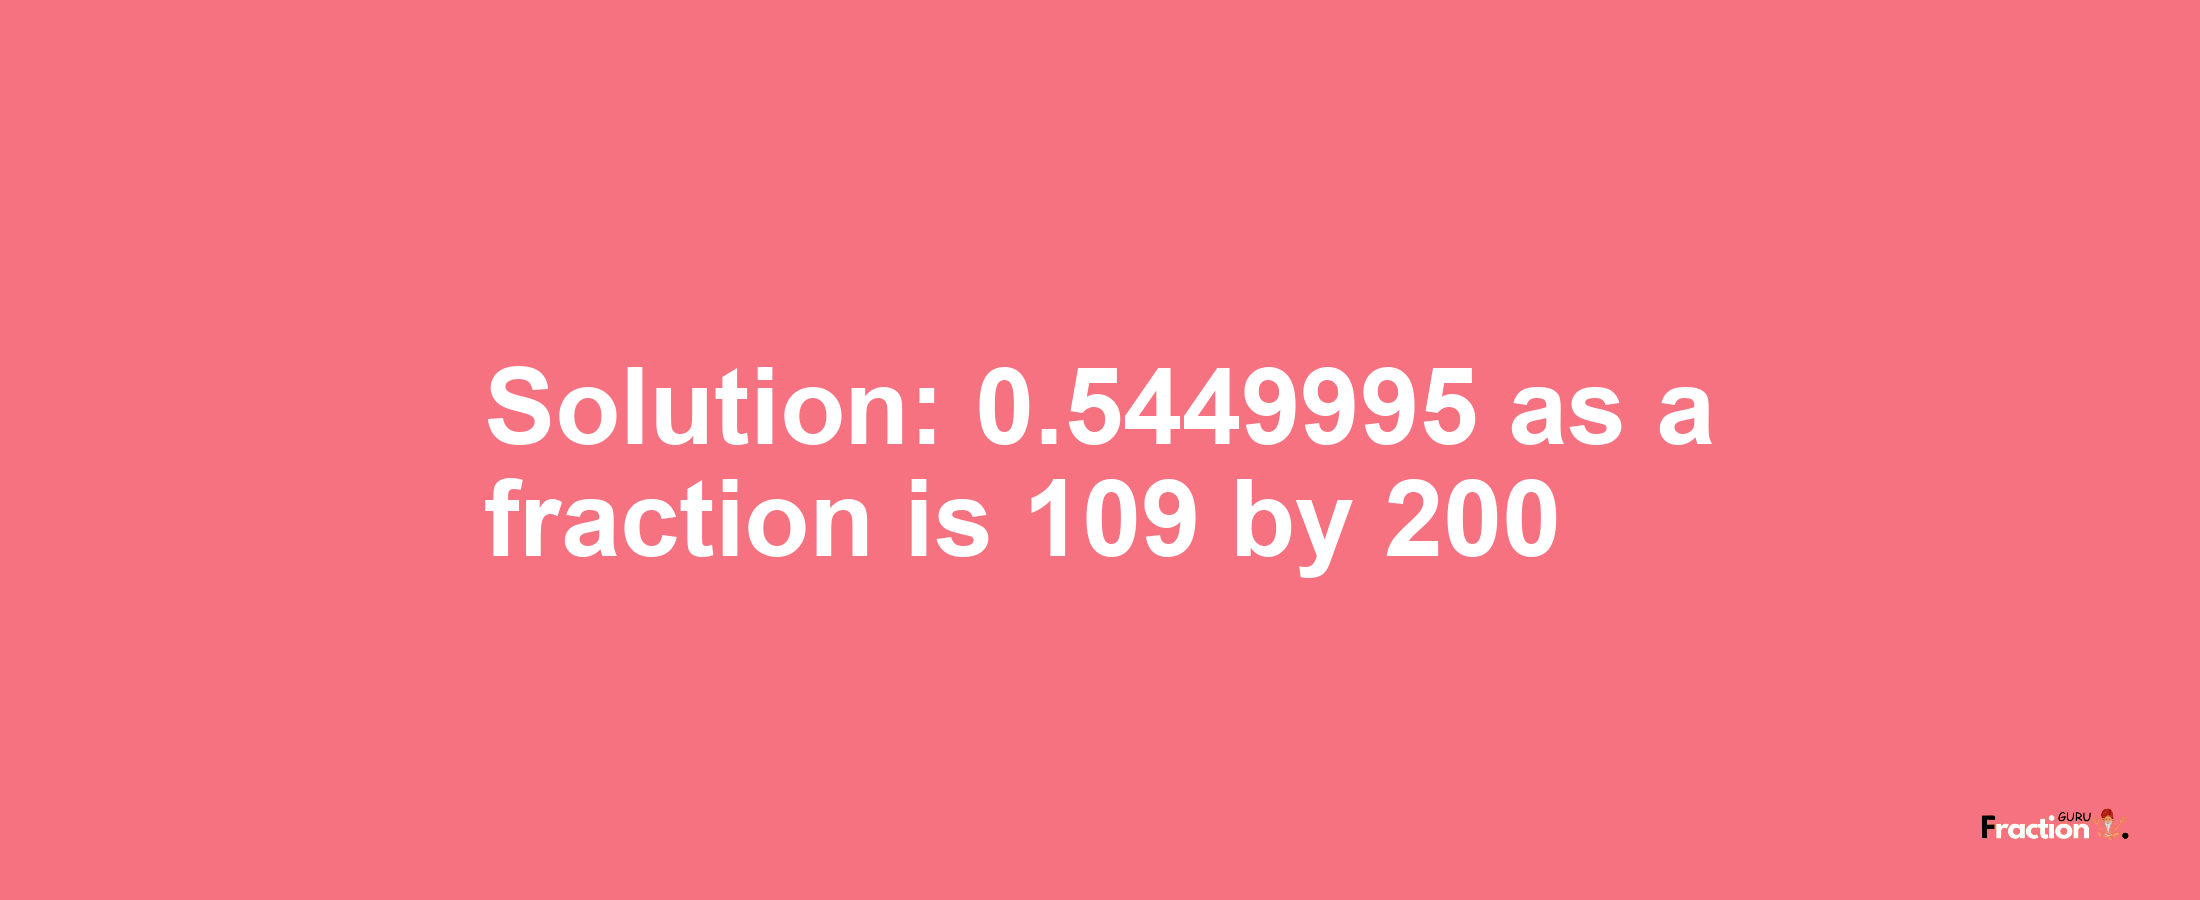 Solution:0.5449995 as a fraction is 109/200